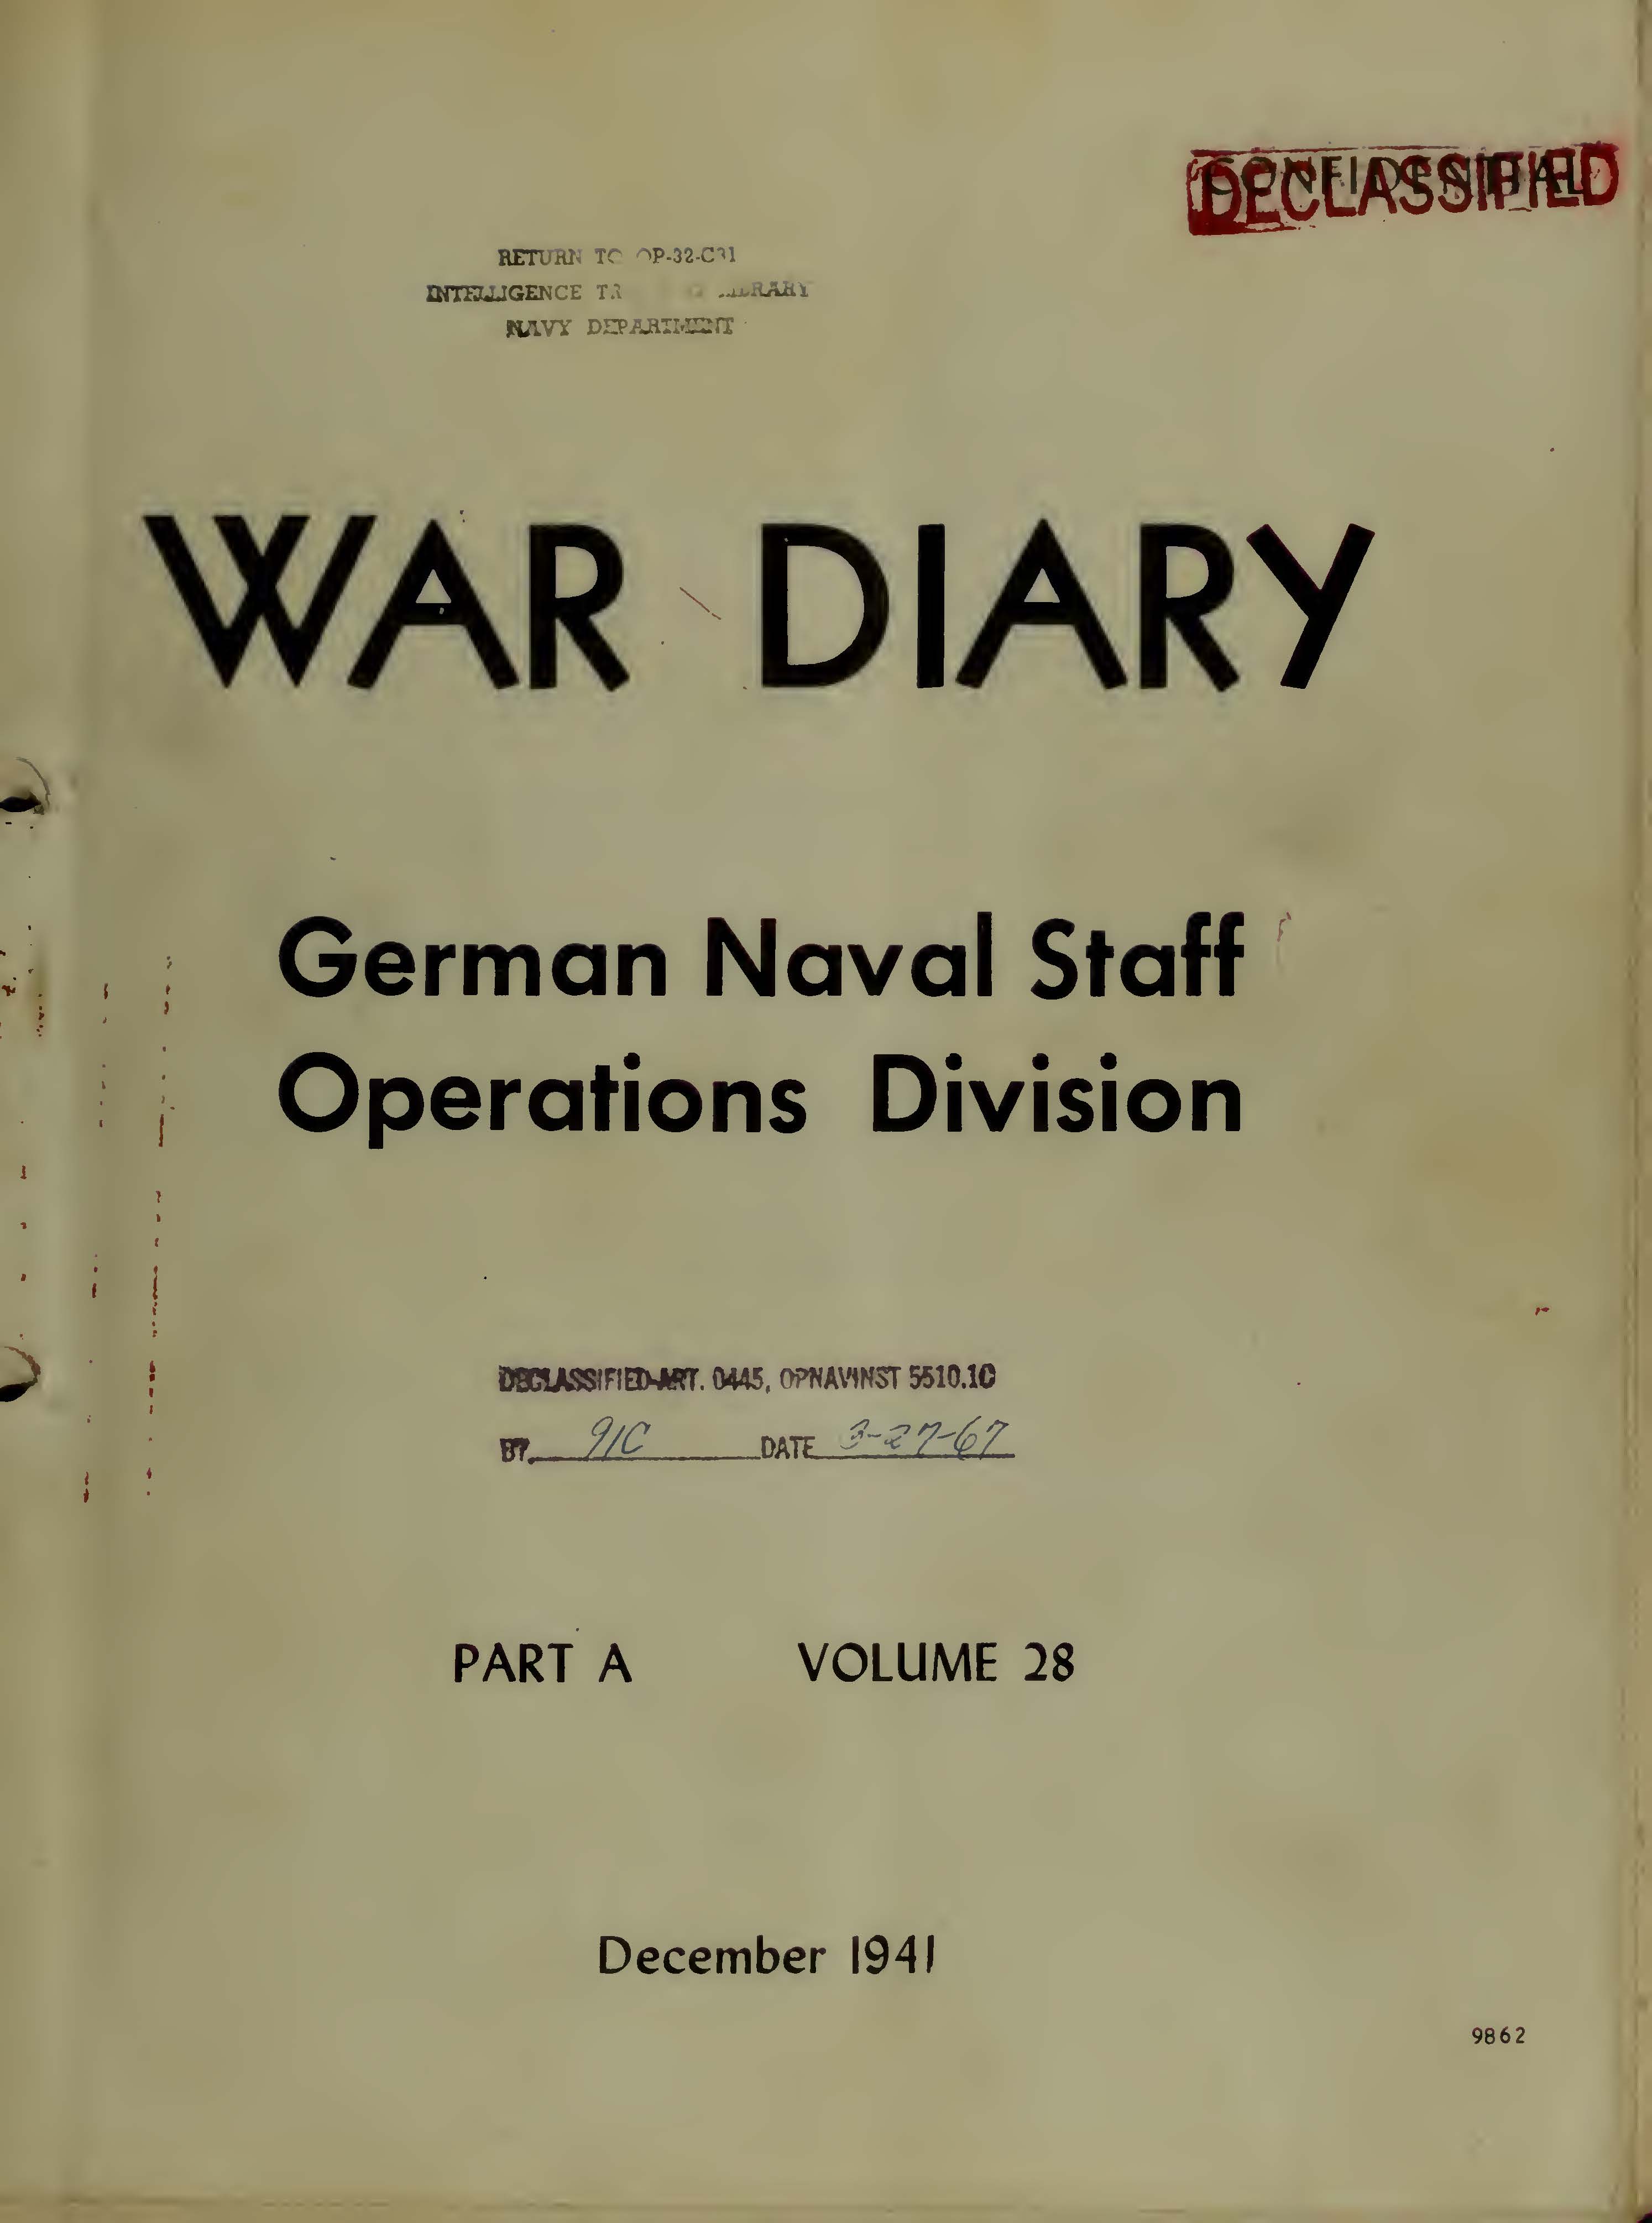 War Diary of German Naval Staff (Operations Division) Part A, Volume 28, December 1941